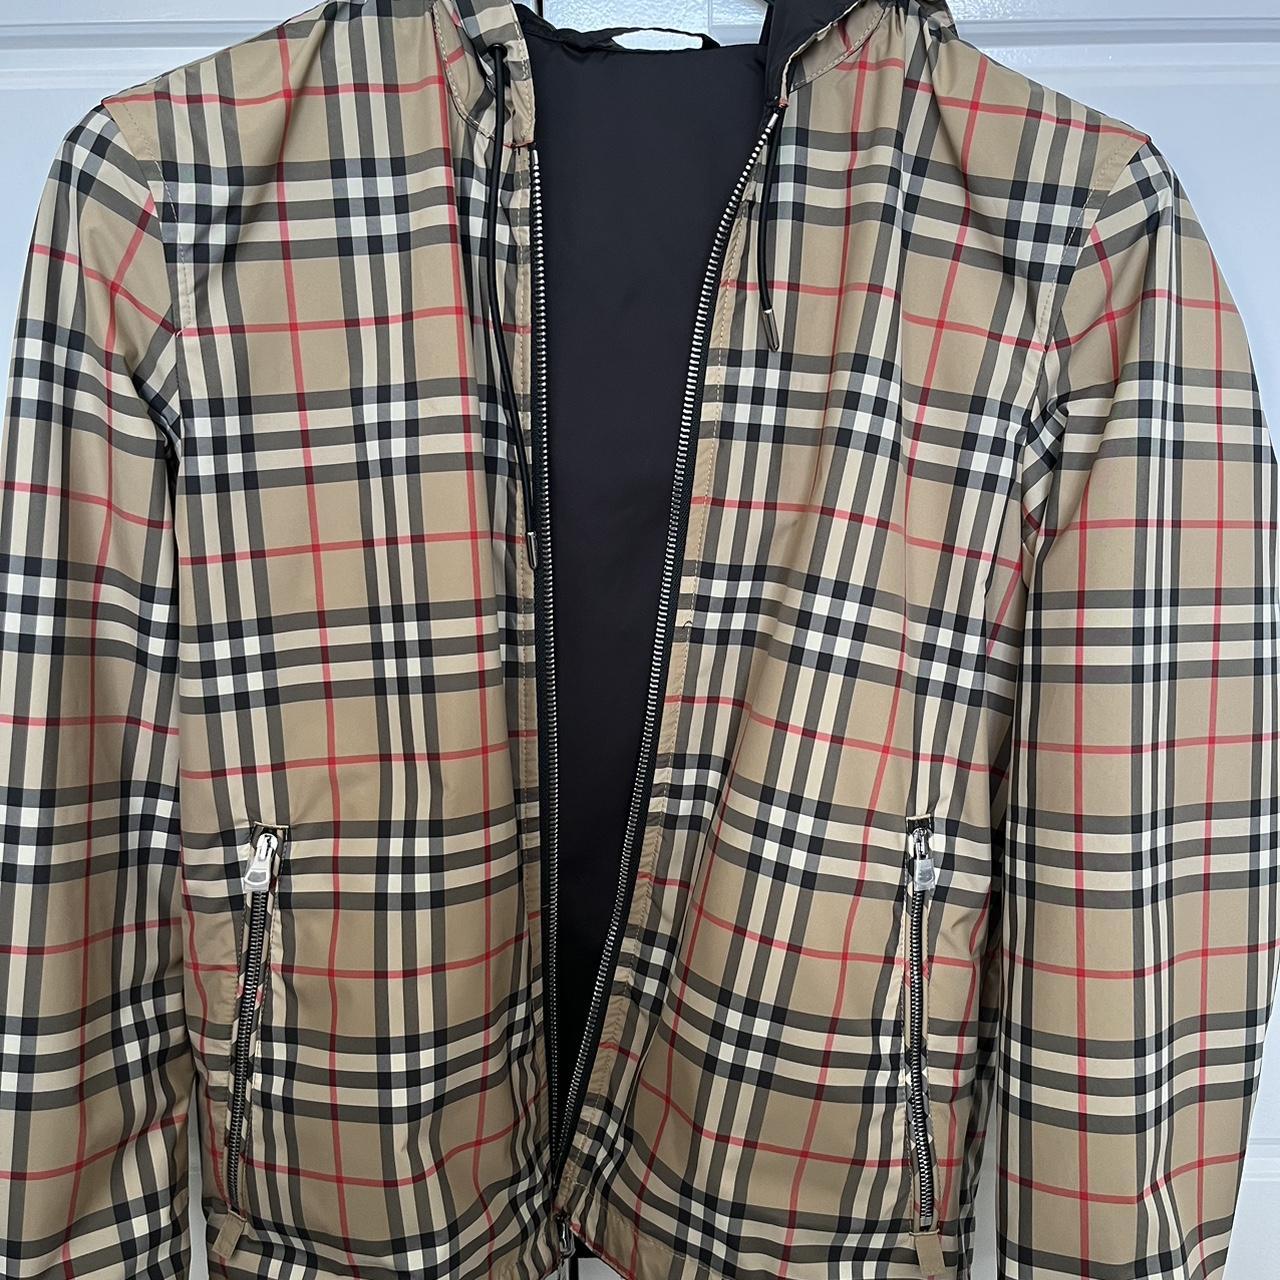 Reversible Burberry jacket for sale. Size XS but... - Depop